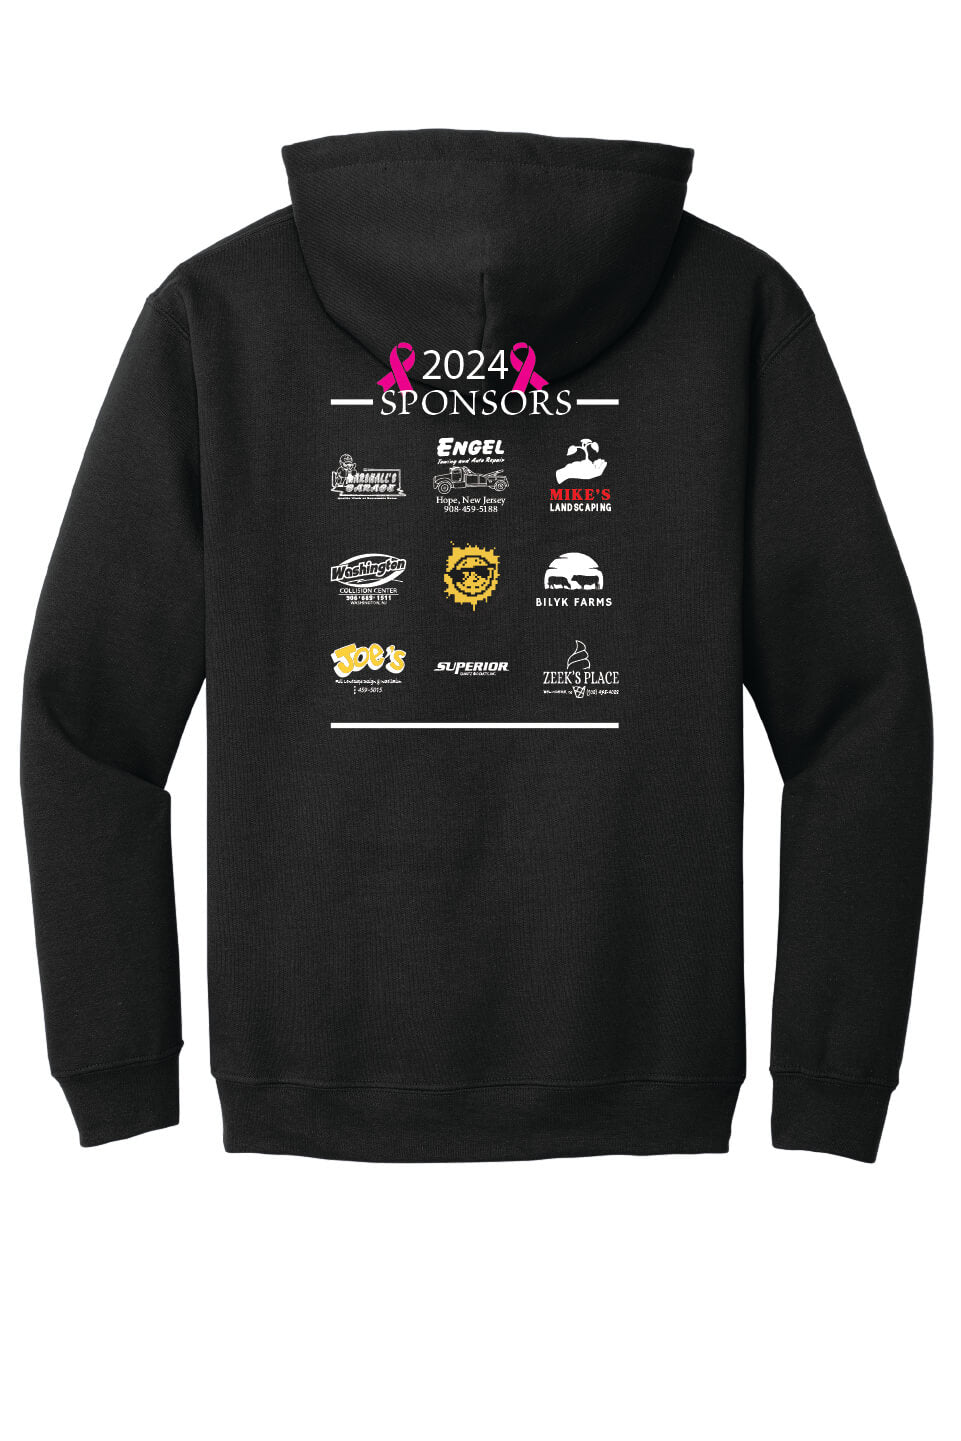 Black Breast Cancer Fundraising Hoodie, back